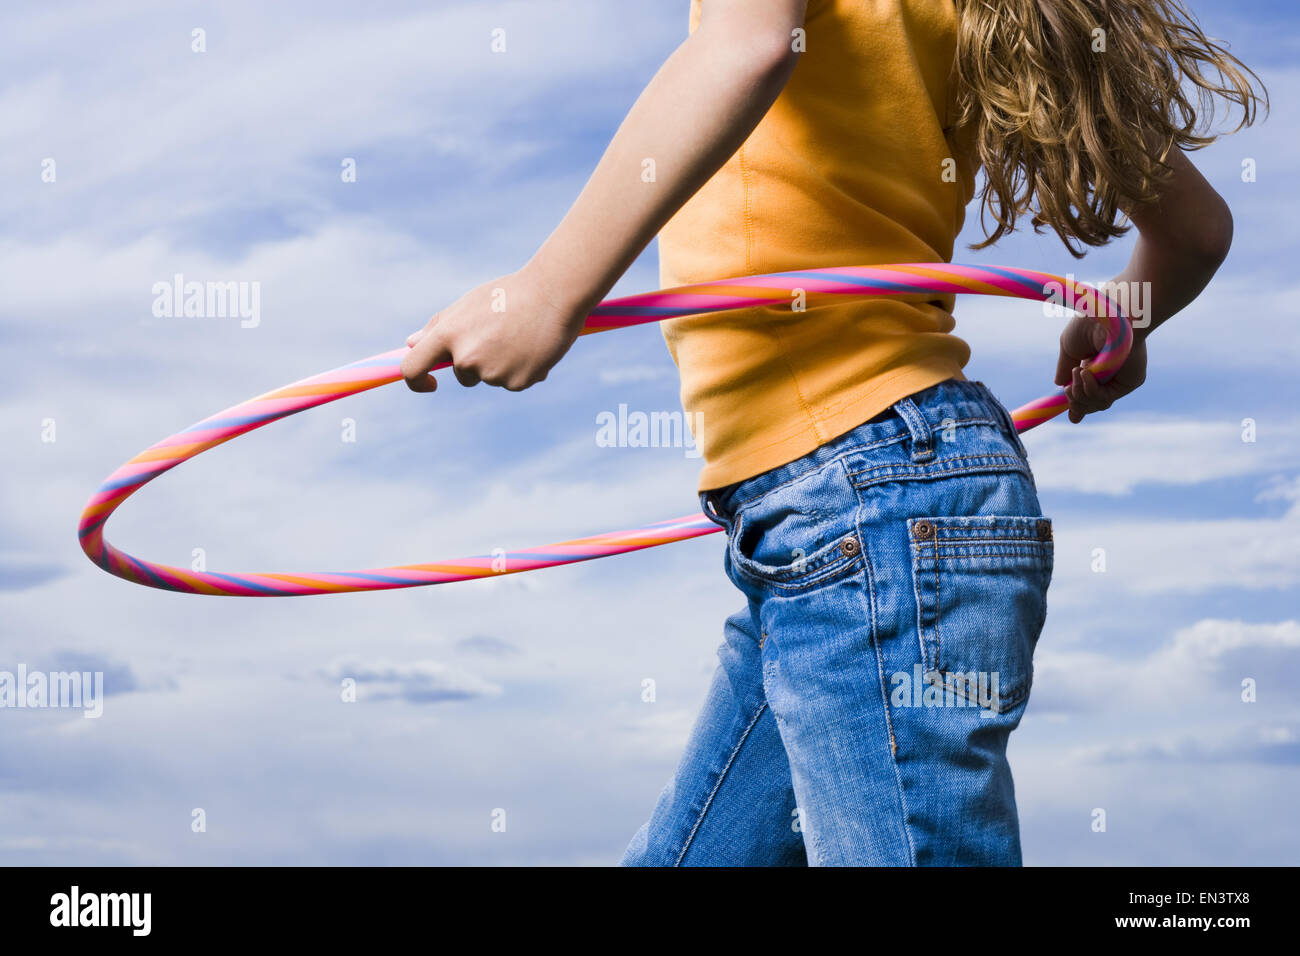 Mid section view of girl with hula hoop outdoors with clouds Stock Photo